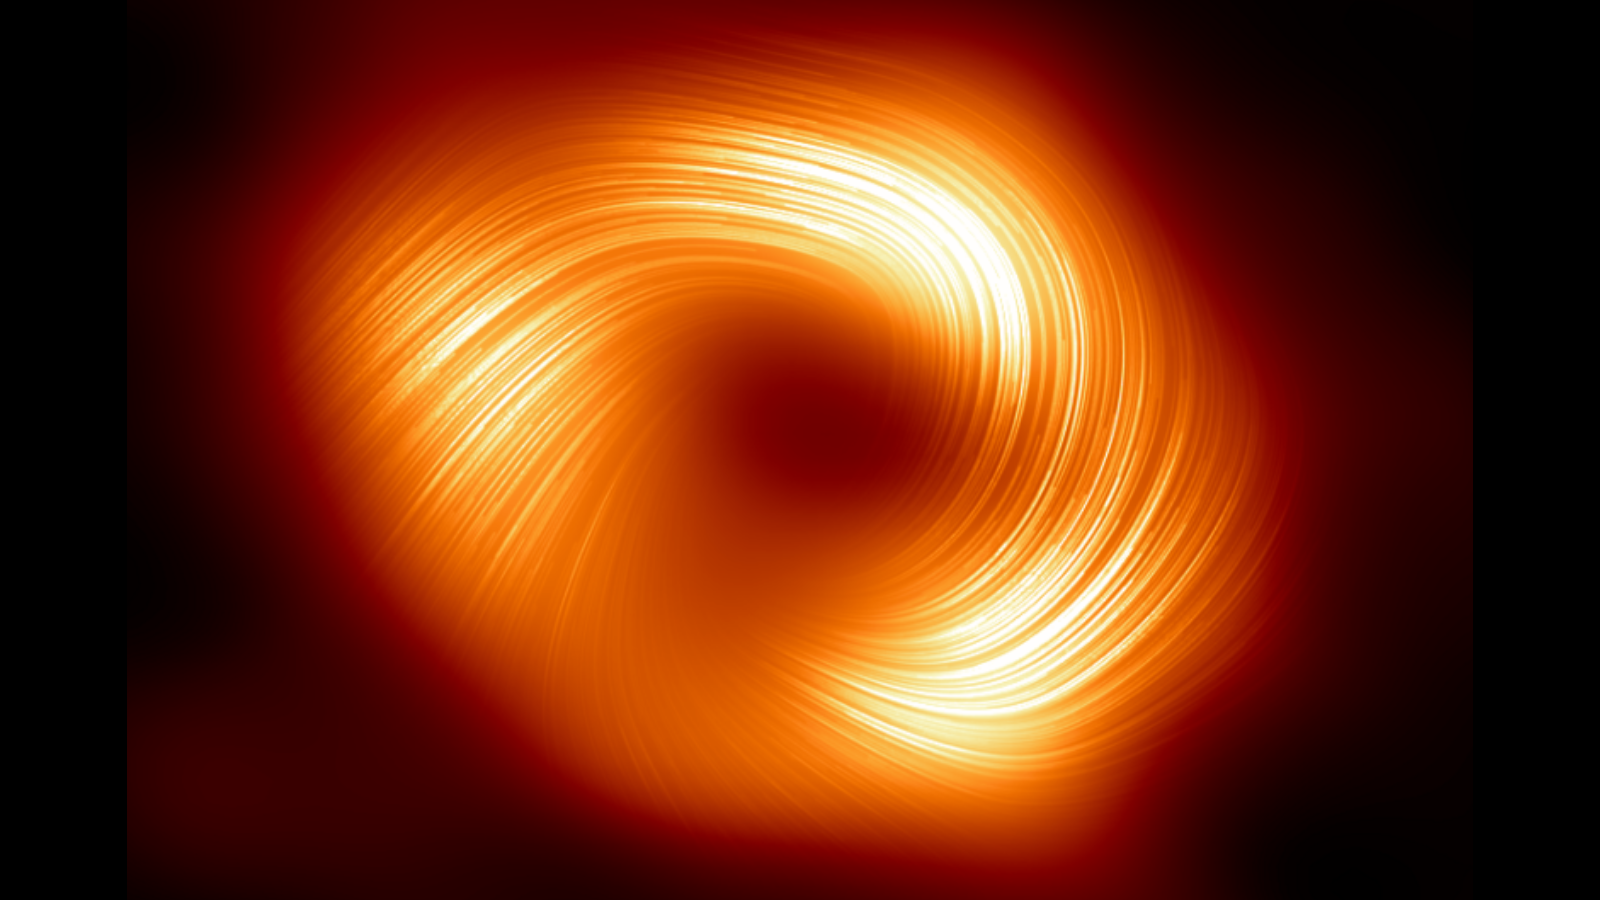 A bright orange ring with bright swirls of light within it against a dark background